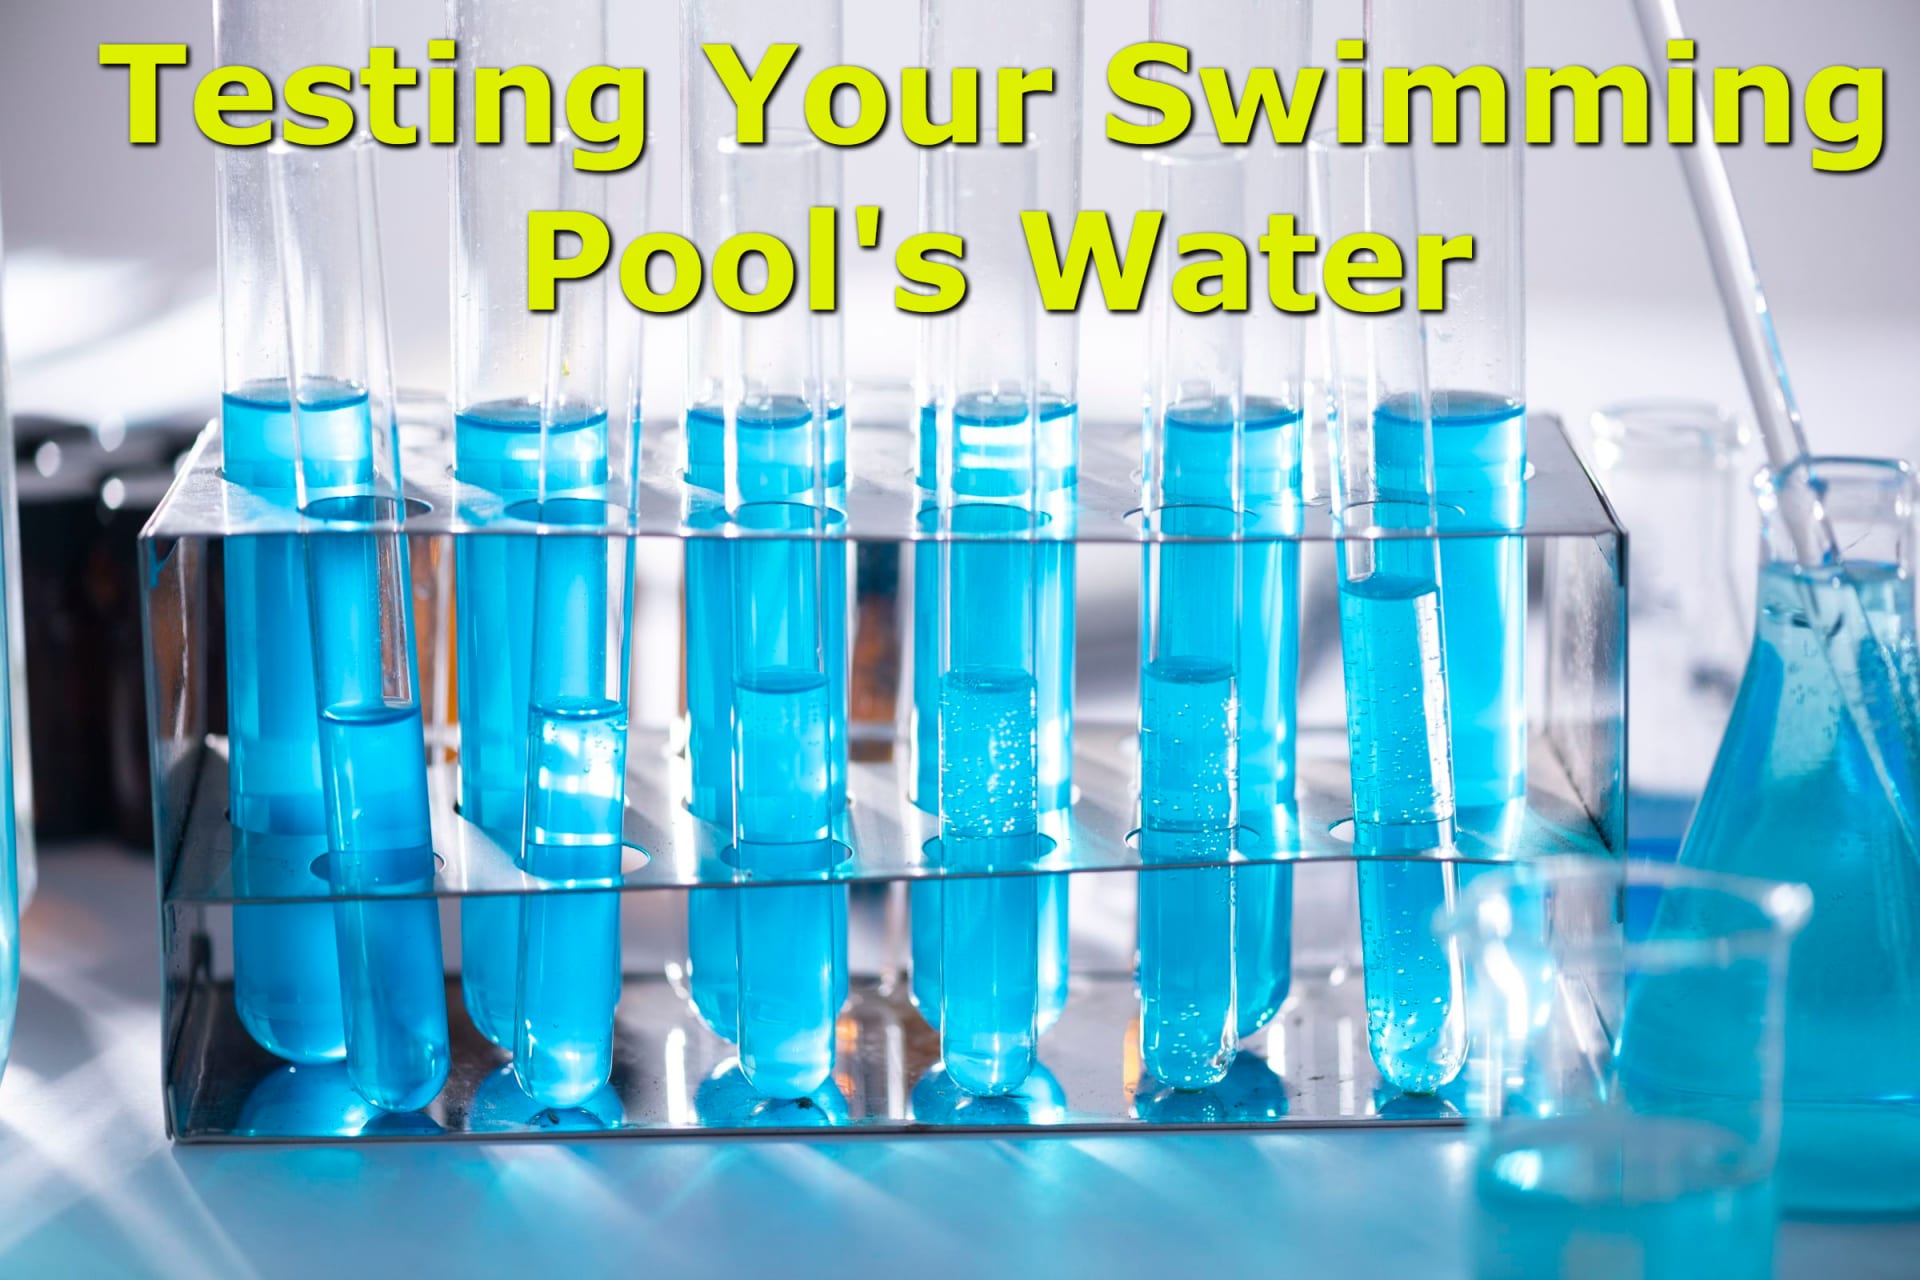 Test Swimming Pool Water with Test Tubes